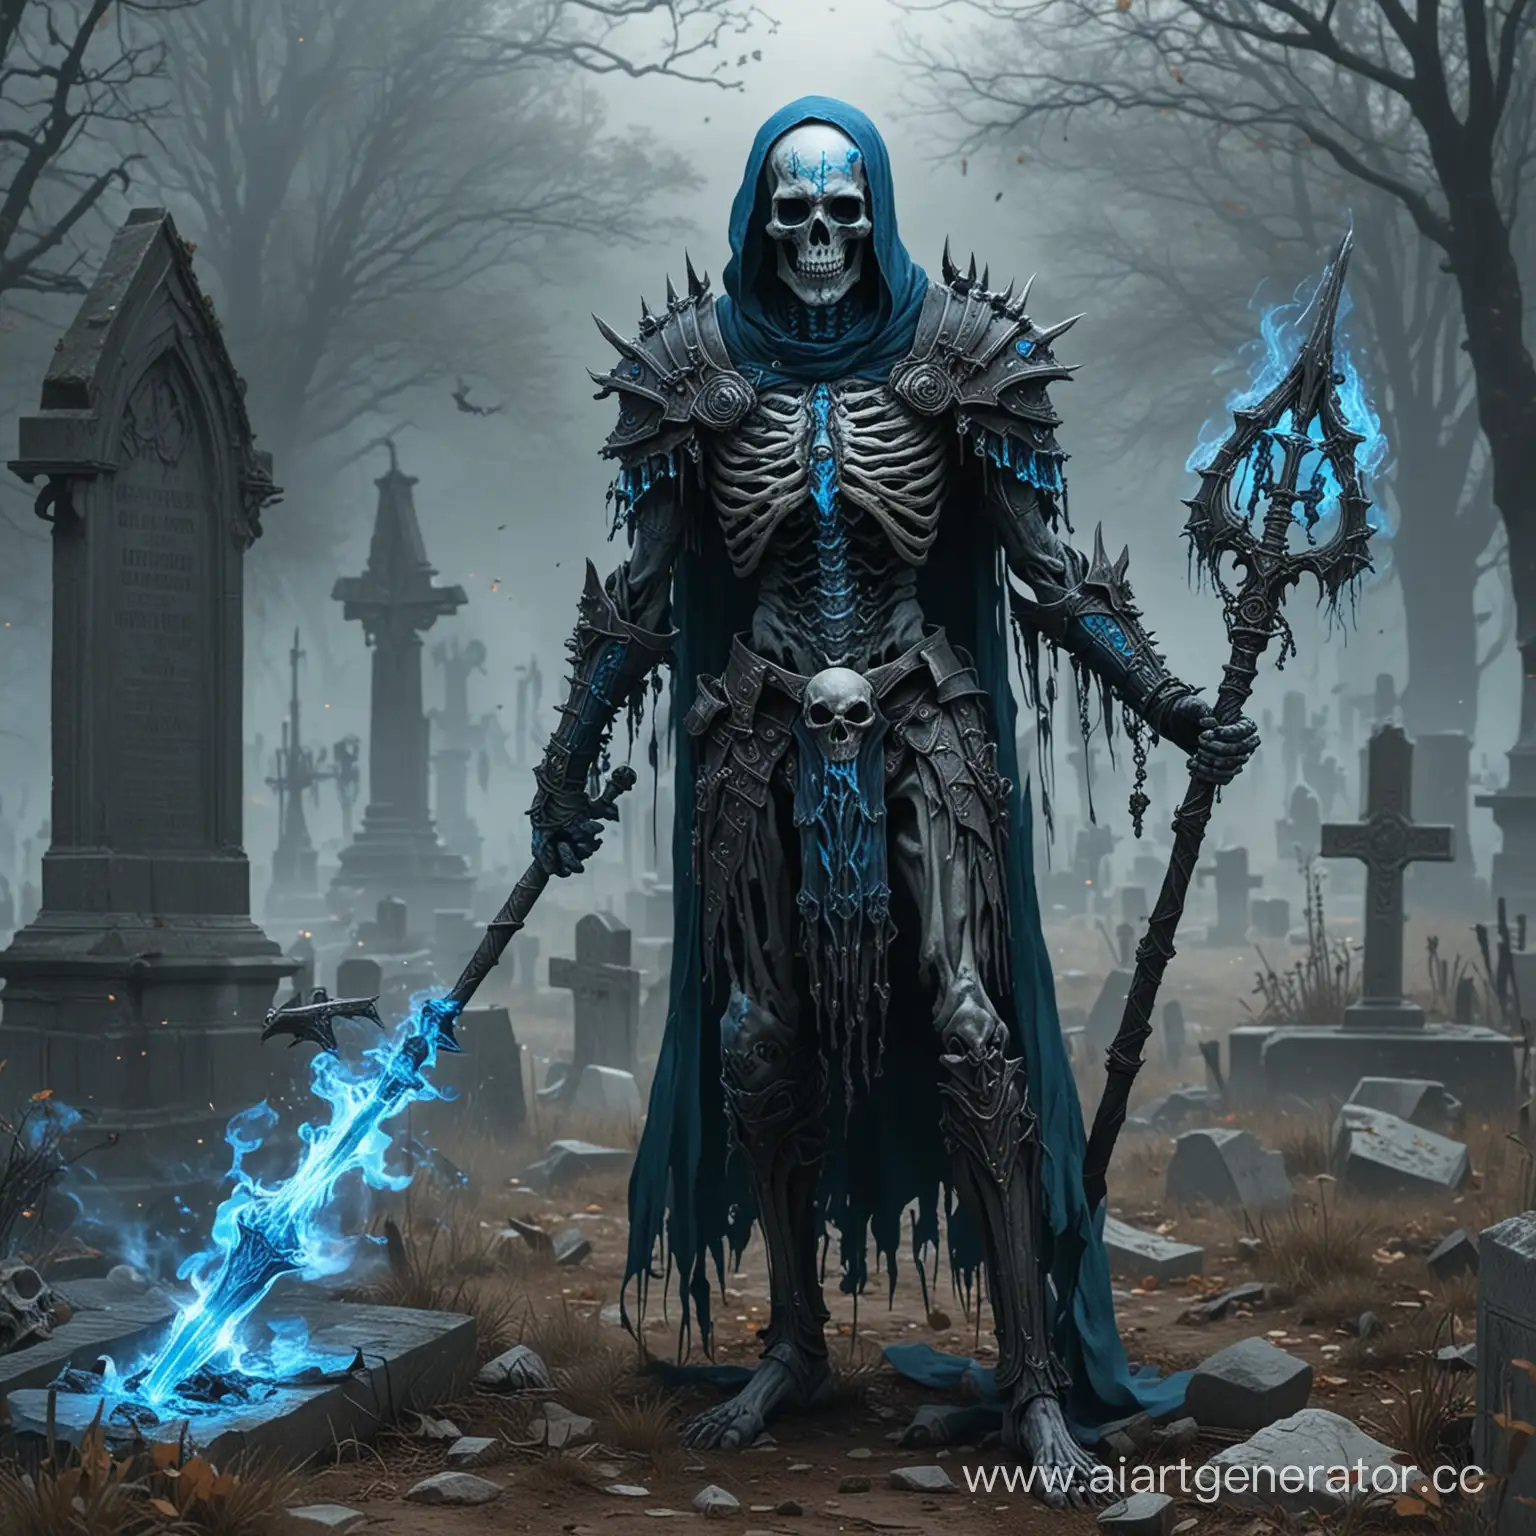 The necromancer is in the cemetery and uses his magic, skeletons, staff, blue flames, armor, spikes on his back